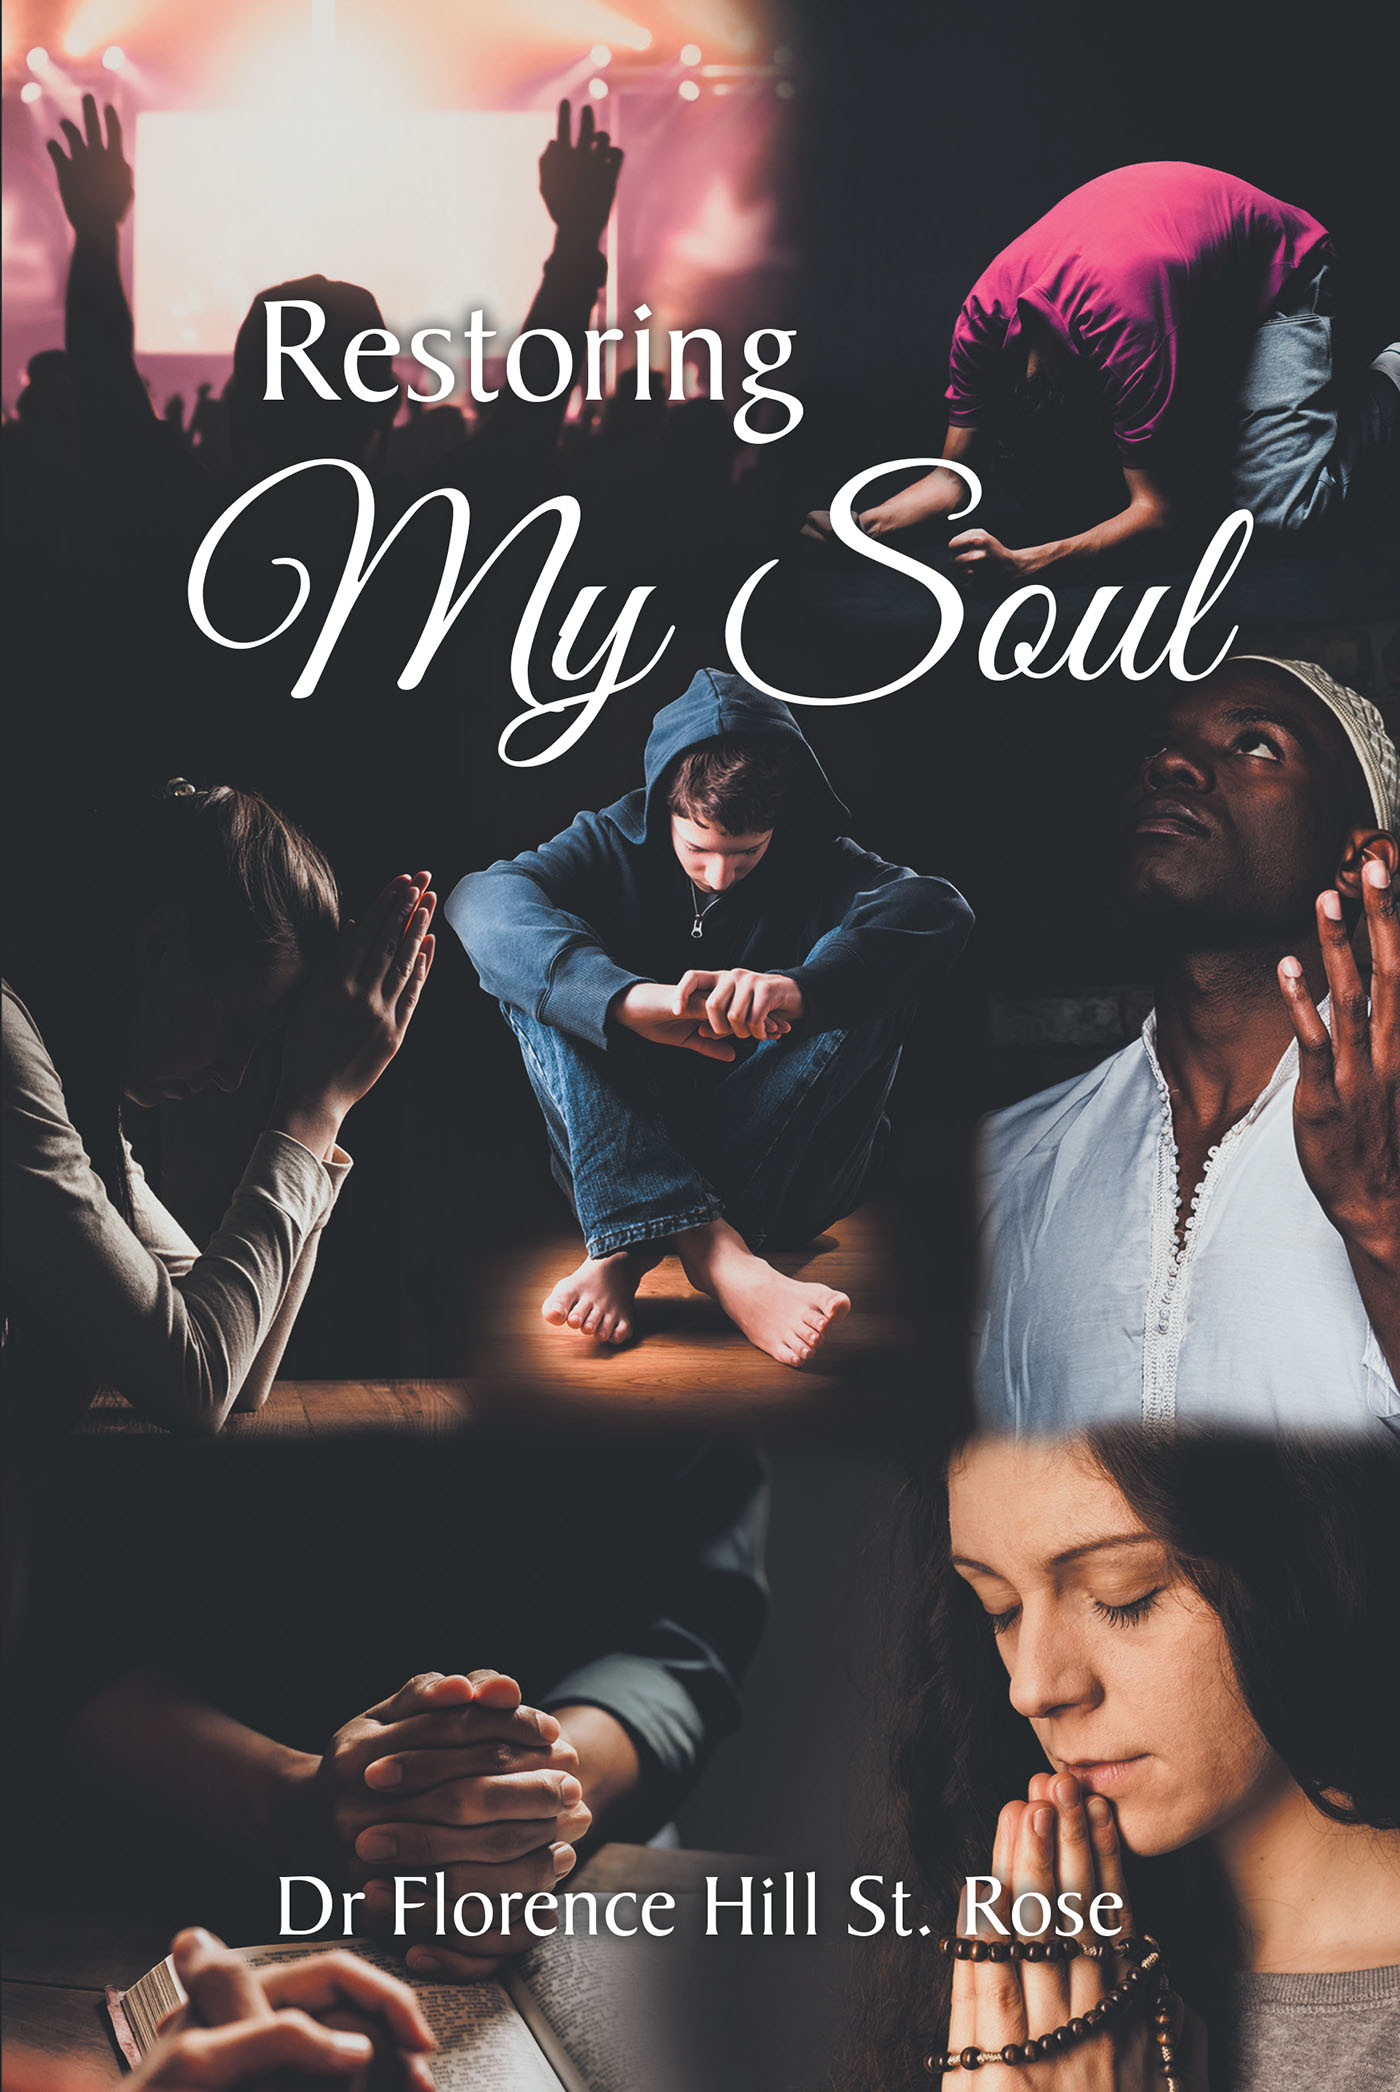 Dr Florence Hill St. Rose’s Newly Released "Restoring My Soul" is a Potent Message of Encouragement That Draws from the Author’s Personal Experiences